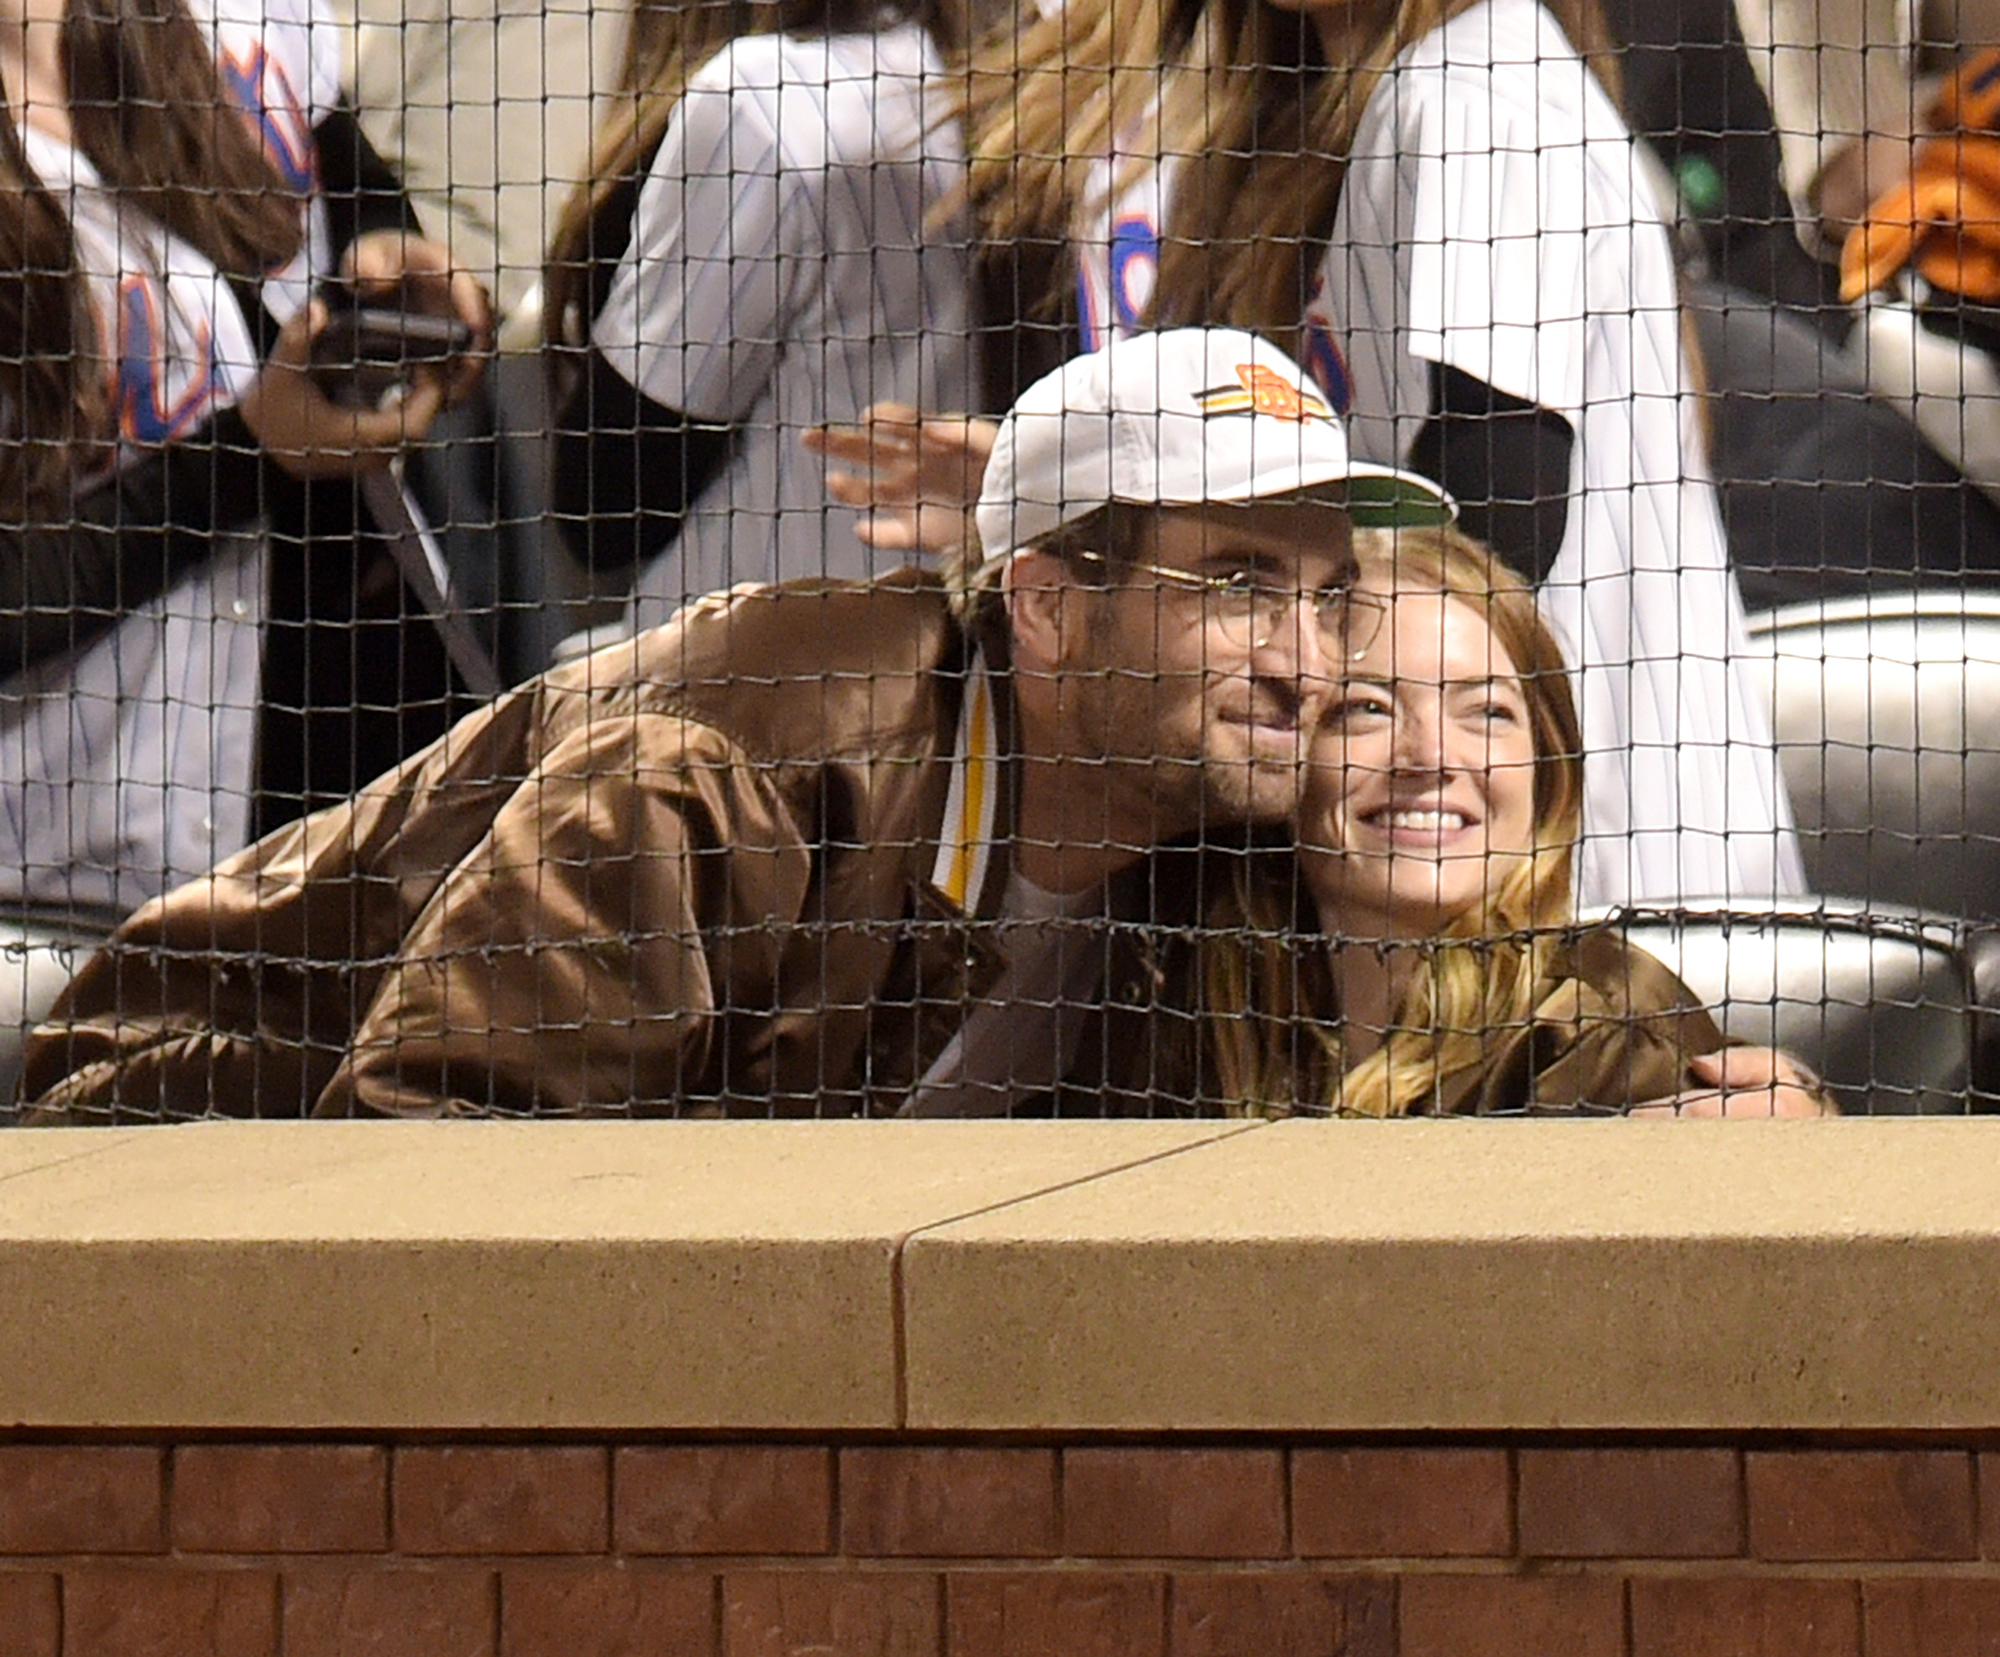 Emma Stone Reacts To Being Booed At Baseball Game